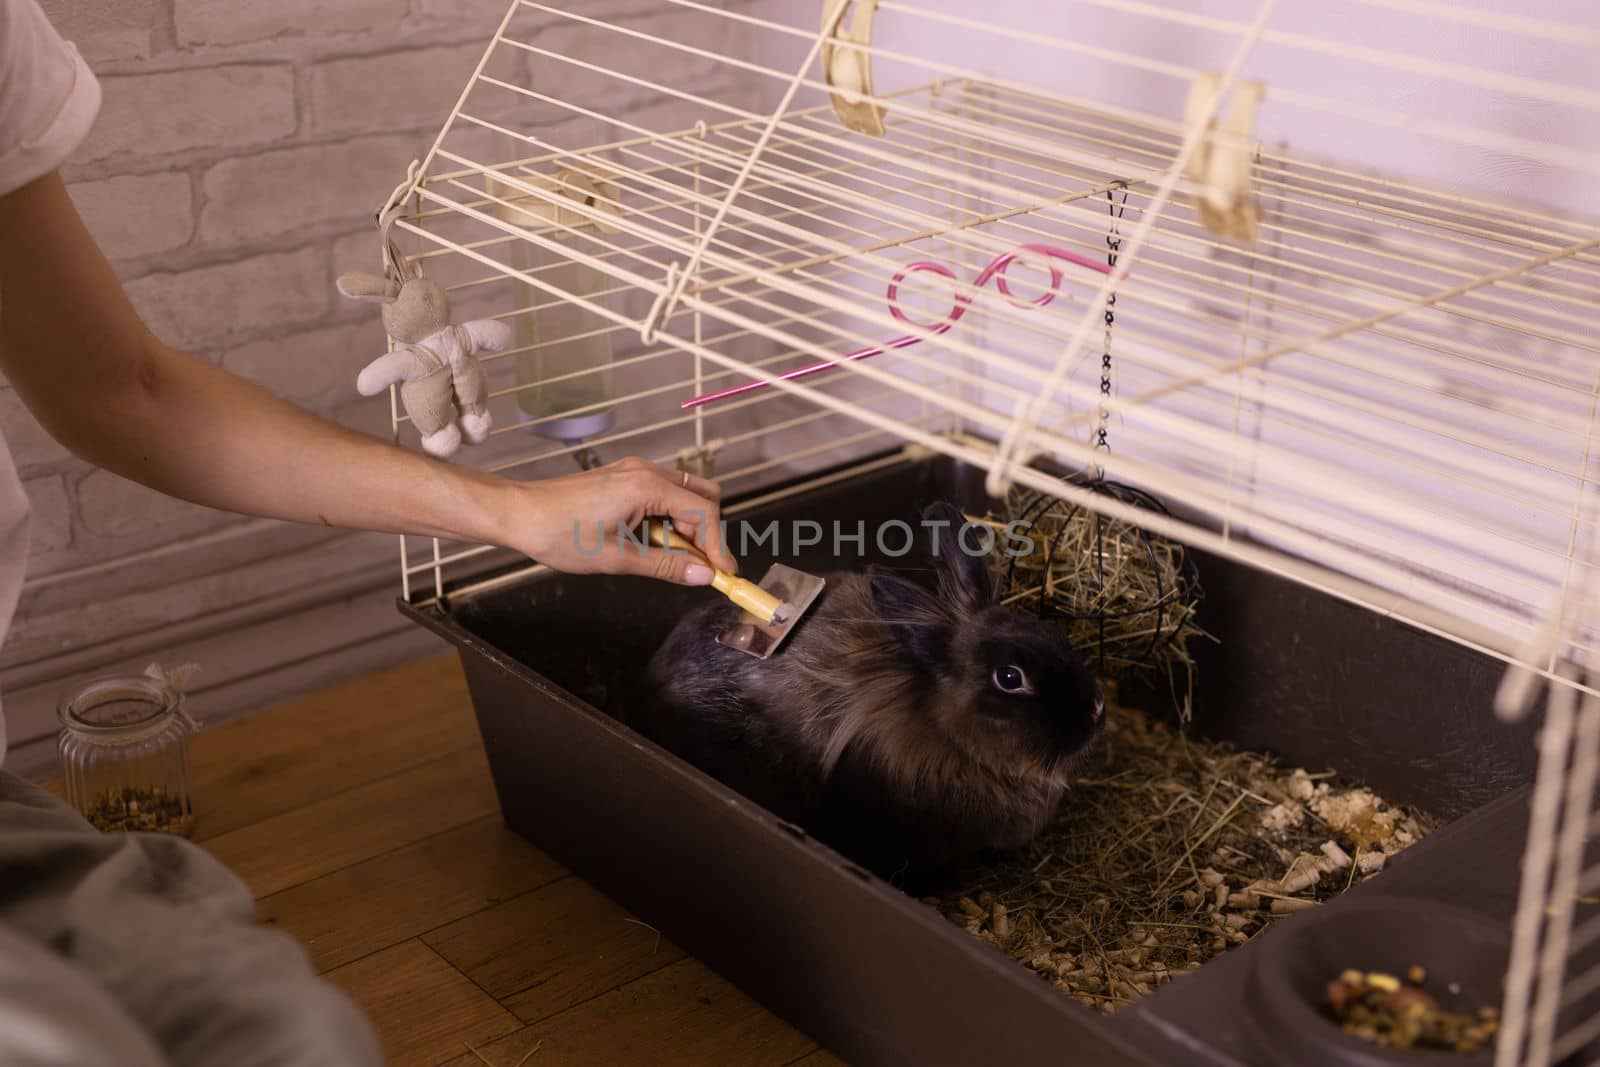 Black little rabbit is shedding. Girl combs his fur with special comb. Care of pets concept by Satura86